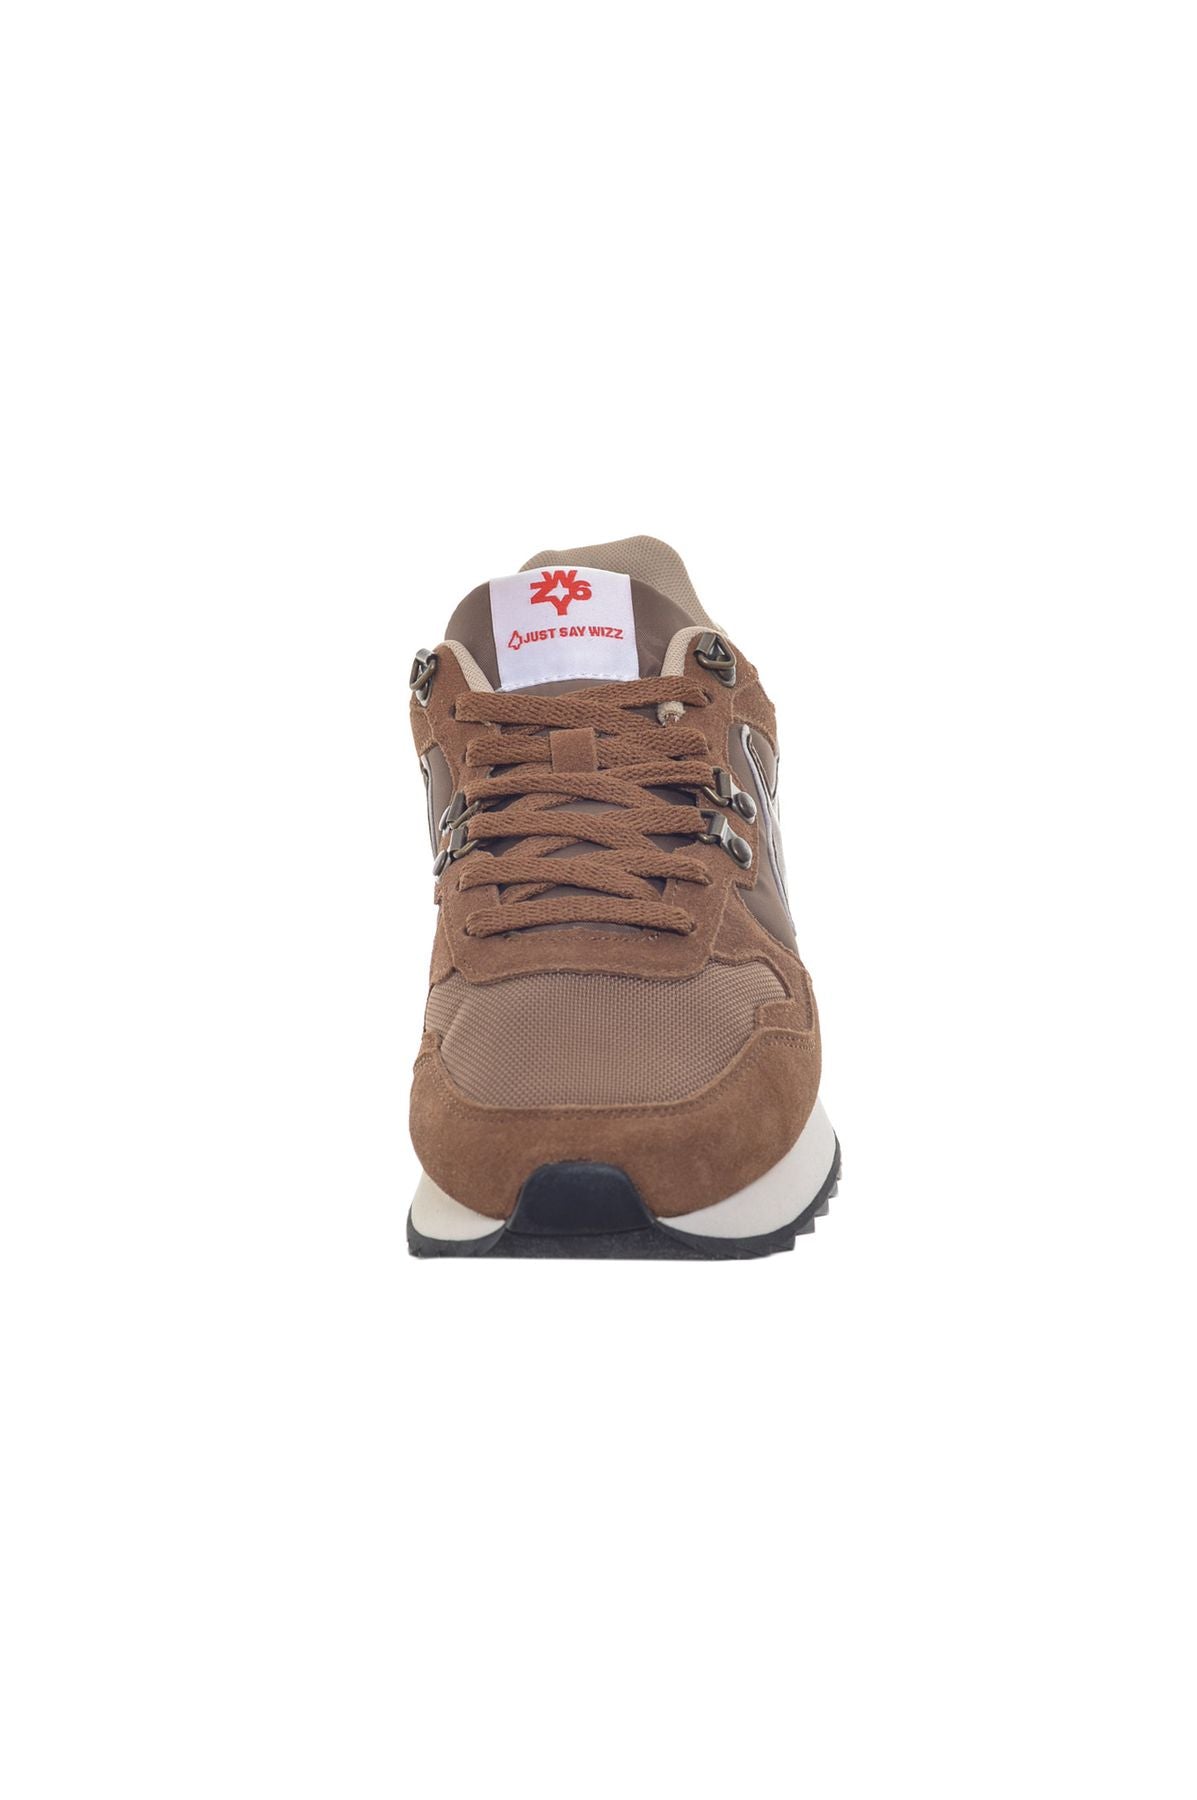 W6YZ Sneakers Autunno/Inverno 0012015185